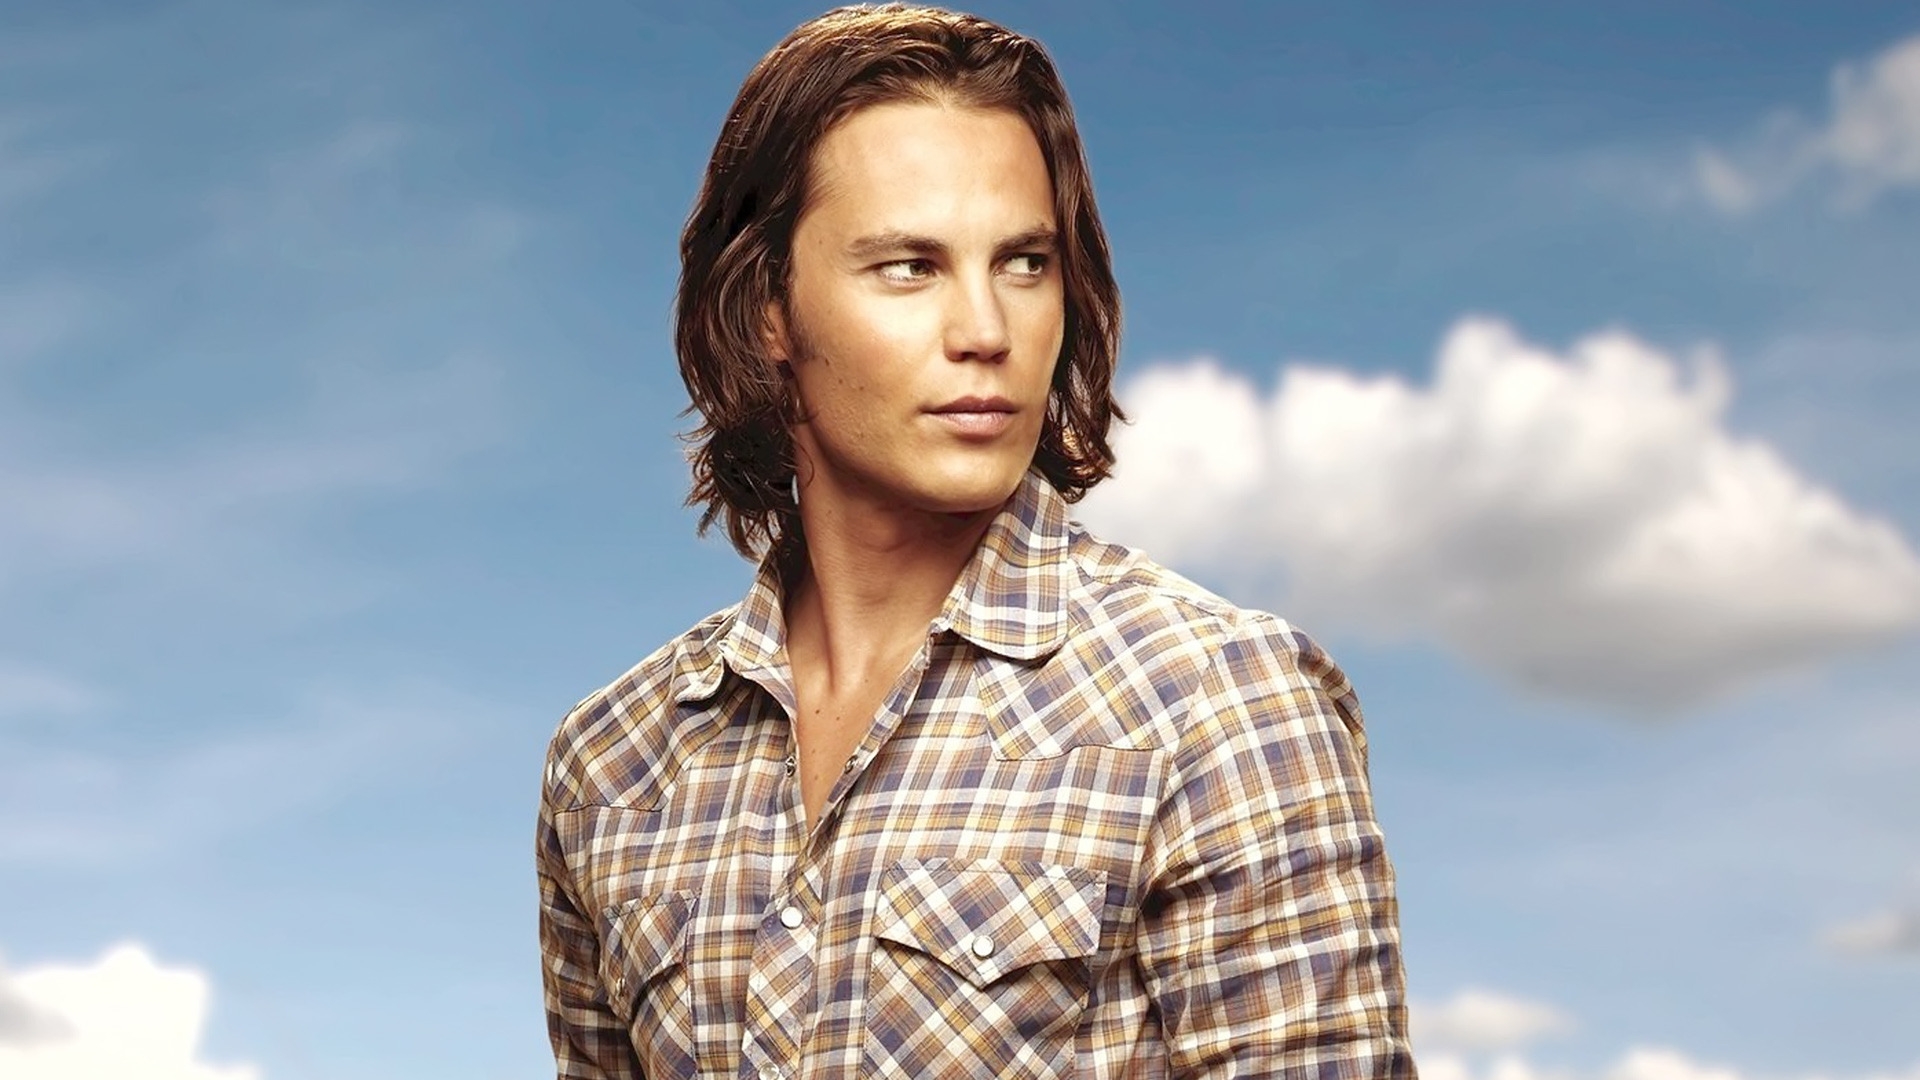 Cool Taylor Kitsch for 1920 x 1080 HDTV 1080p resolution